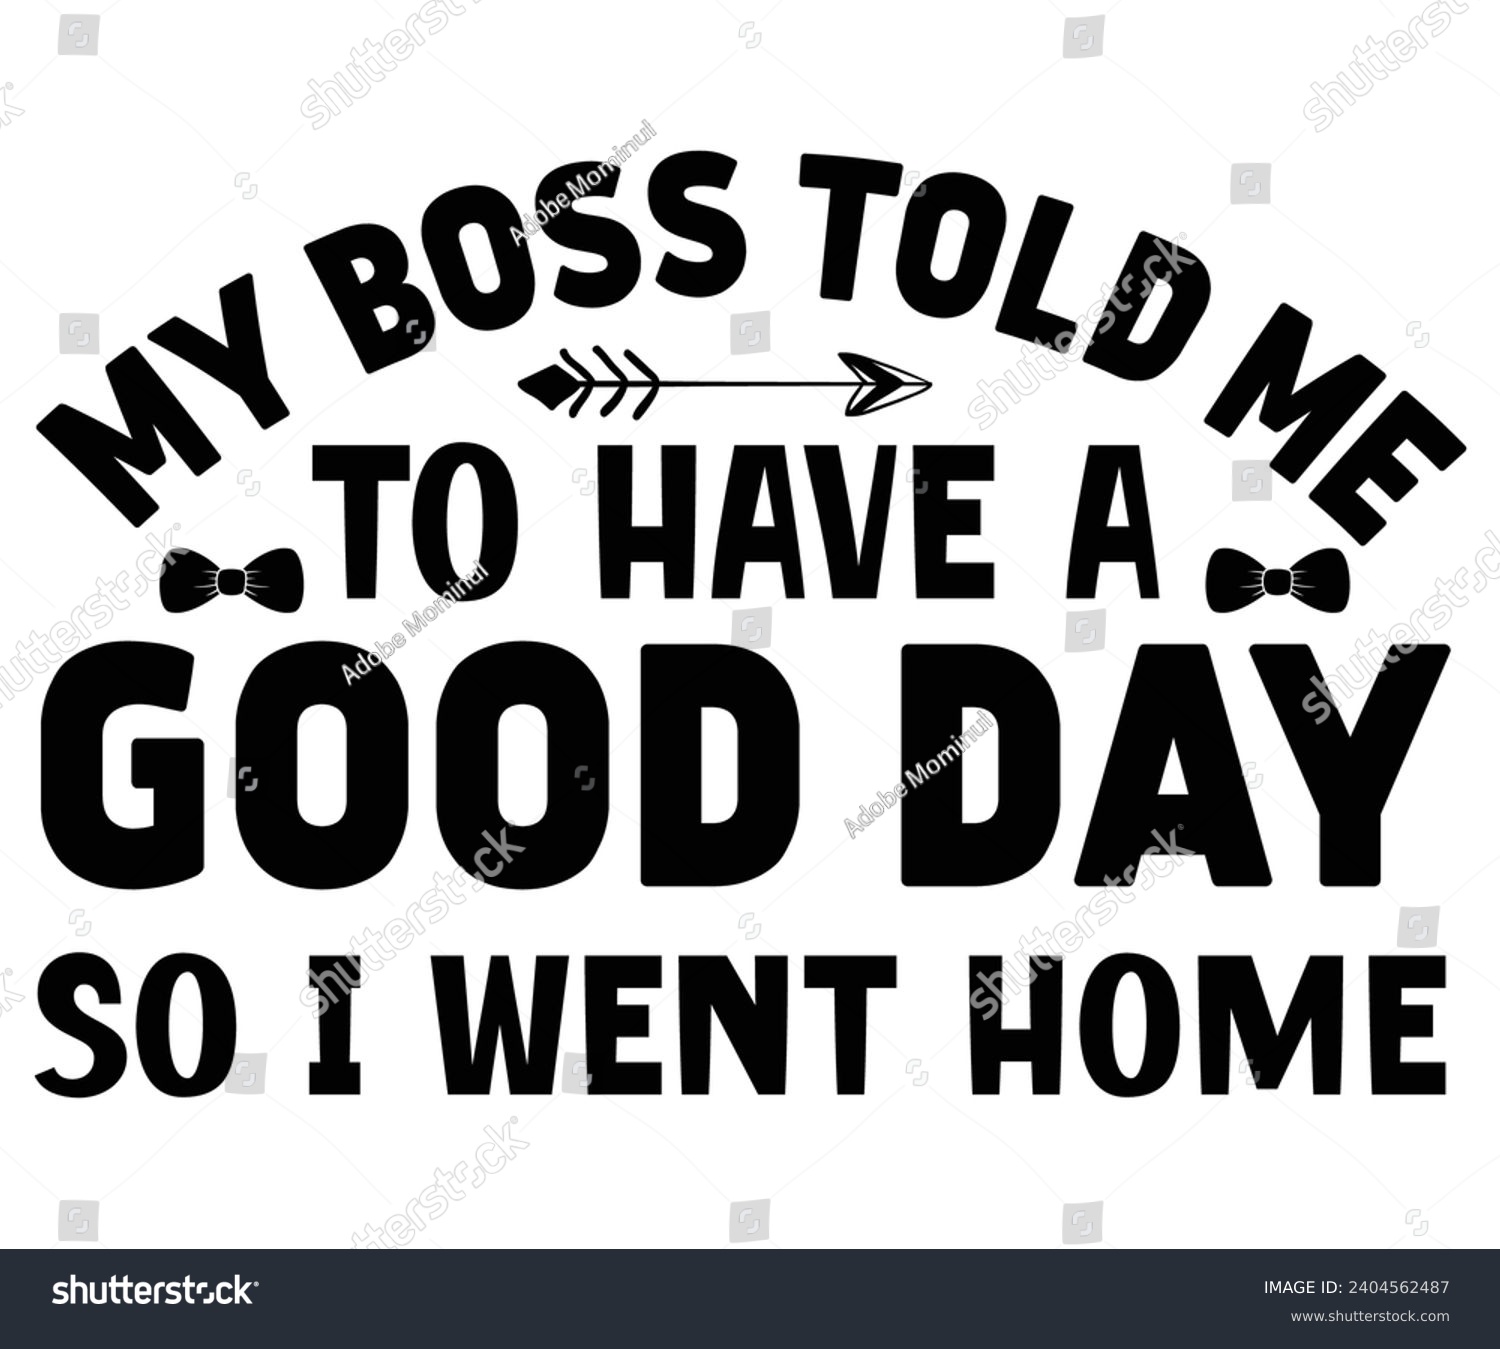 SVG of My Boss Told Me To Have A Good Day Svg,Happy Boss Day svg,Boss Saying Quotes,Boss Day T-shirt,Gift for Boss,Great Jobs,Happy Bosses Day t-shirt,Girl Boss Shirt,Motivational Boss,Cut File,Circut, svg